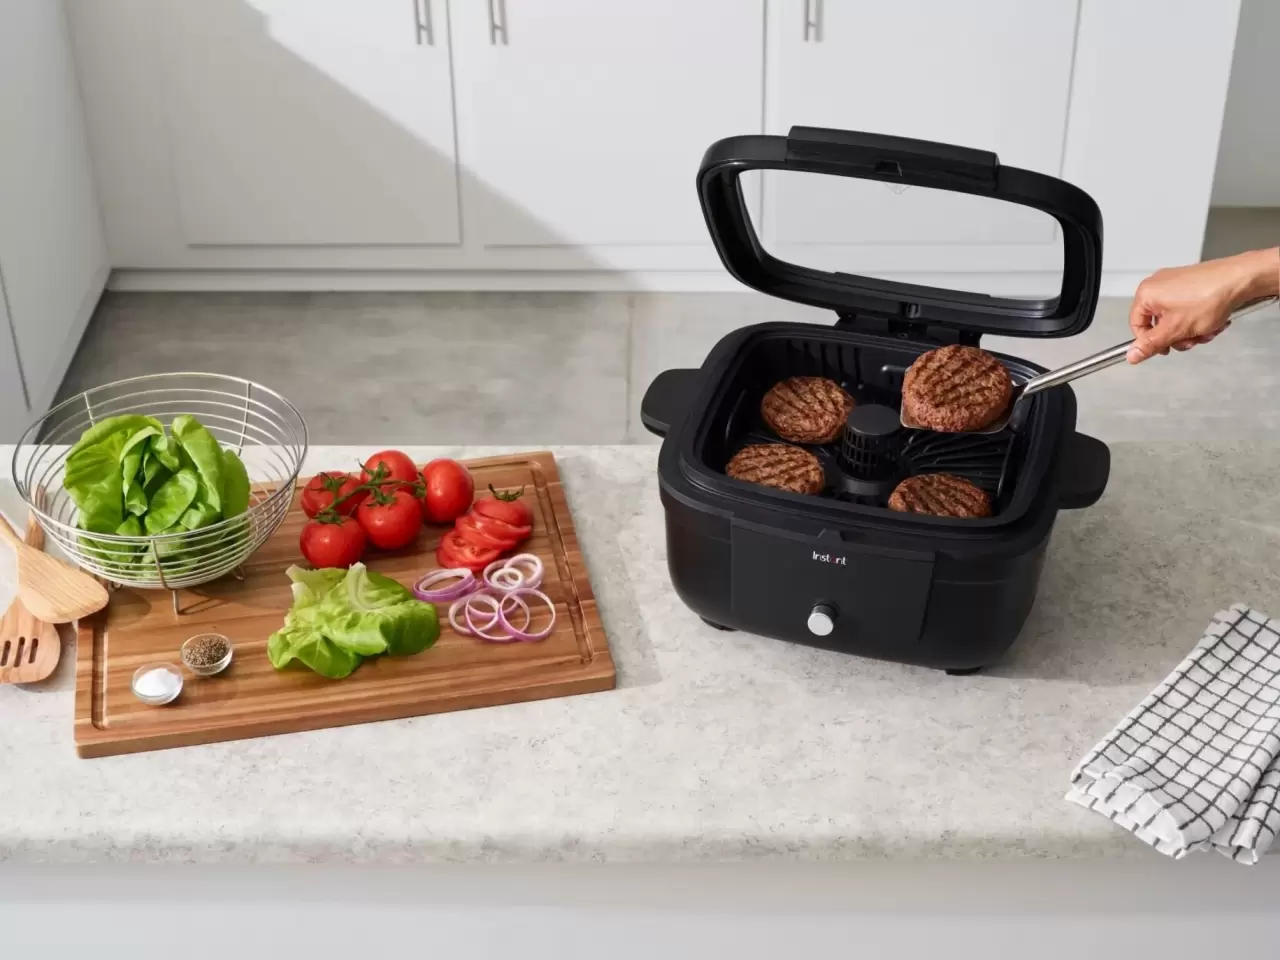 Instant Brands launches multifunctional indoor grill & air fryer